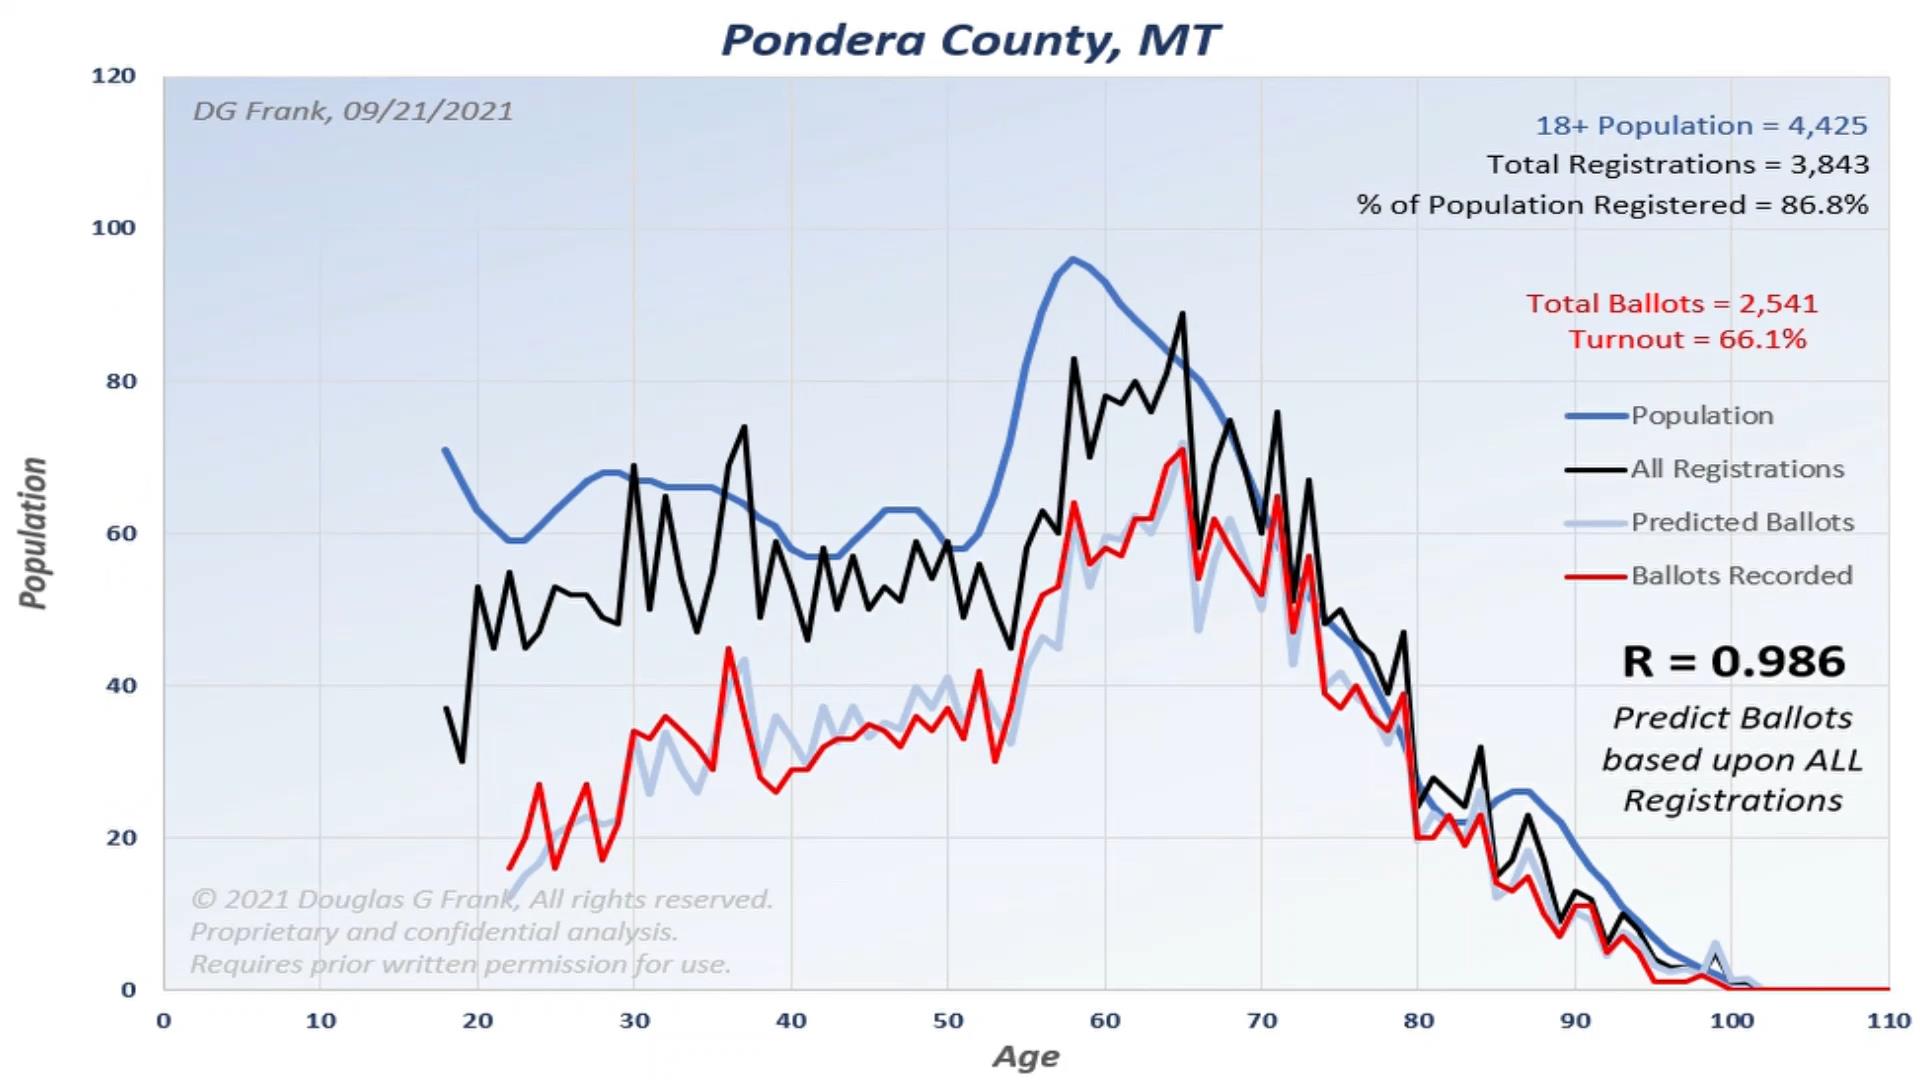 Pondera County 2020 Election Analysis Chart by Dr. Doug Frank